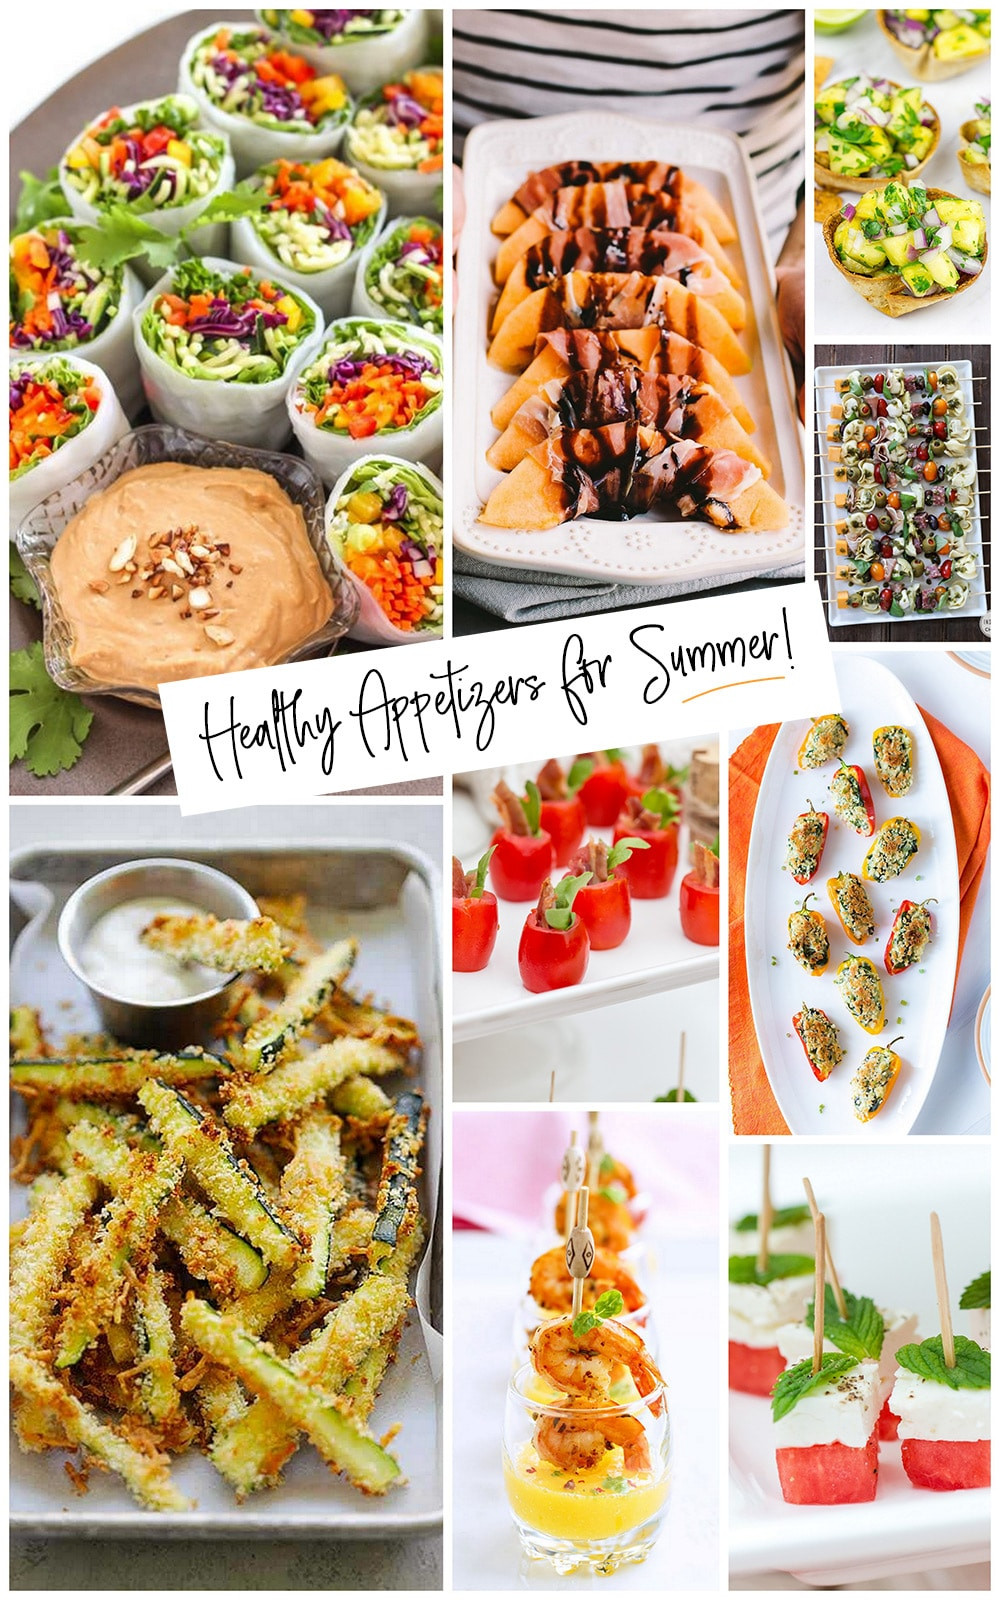 Healthy Easy Appetizers
 Healthy Summer Appetizers Easy & Delish Pizzazzerie